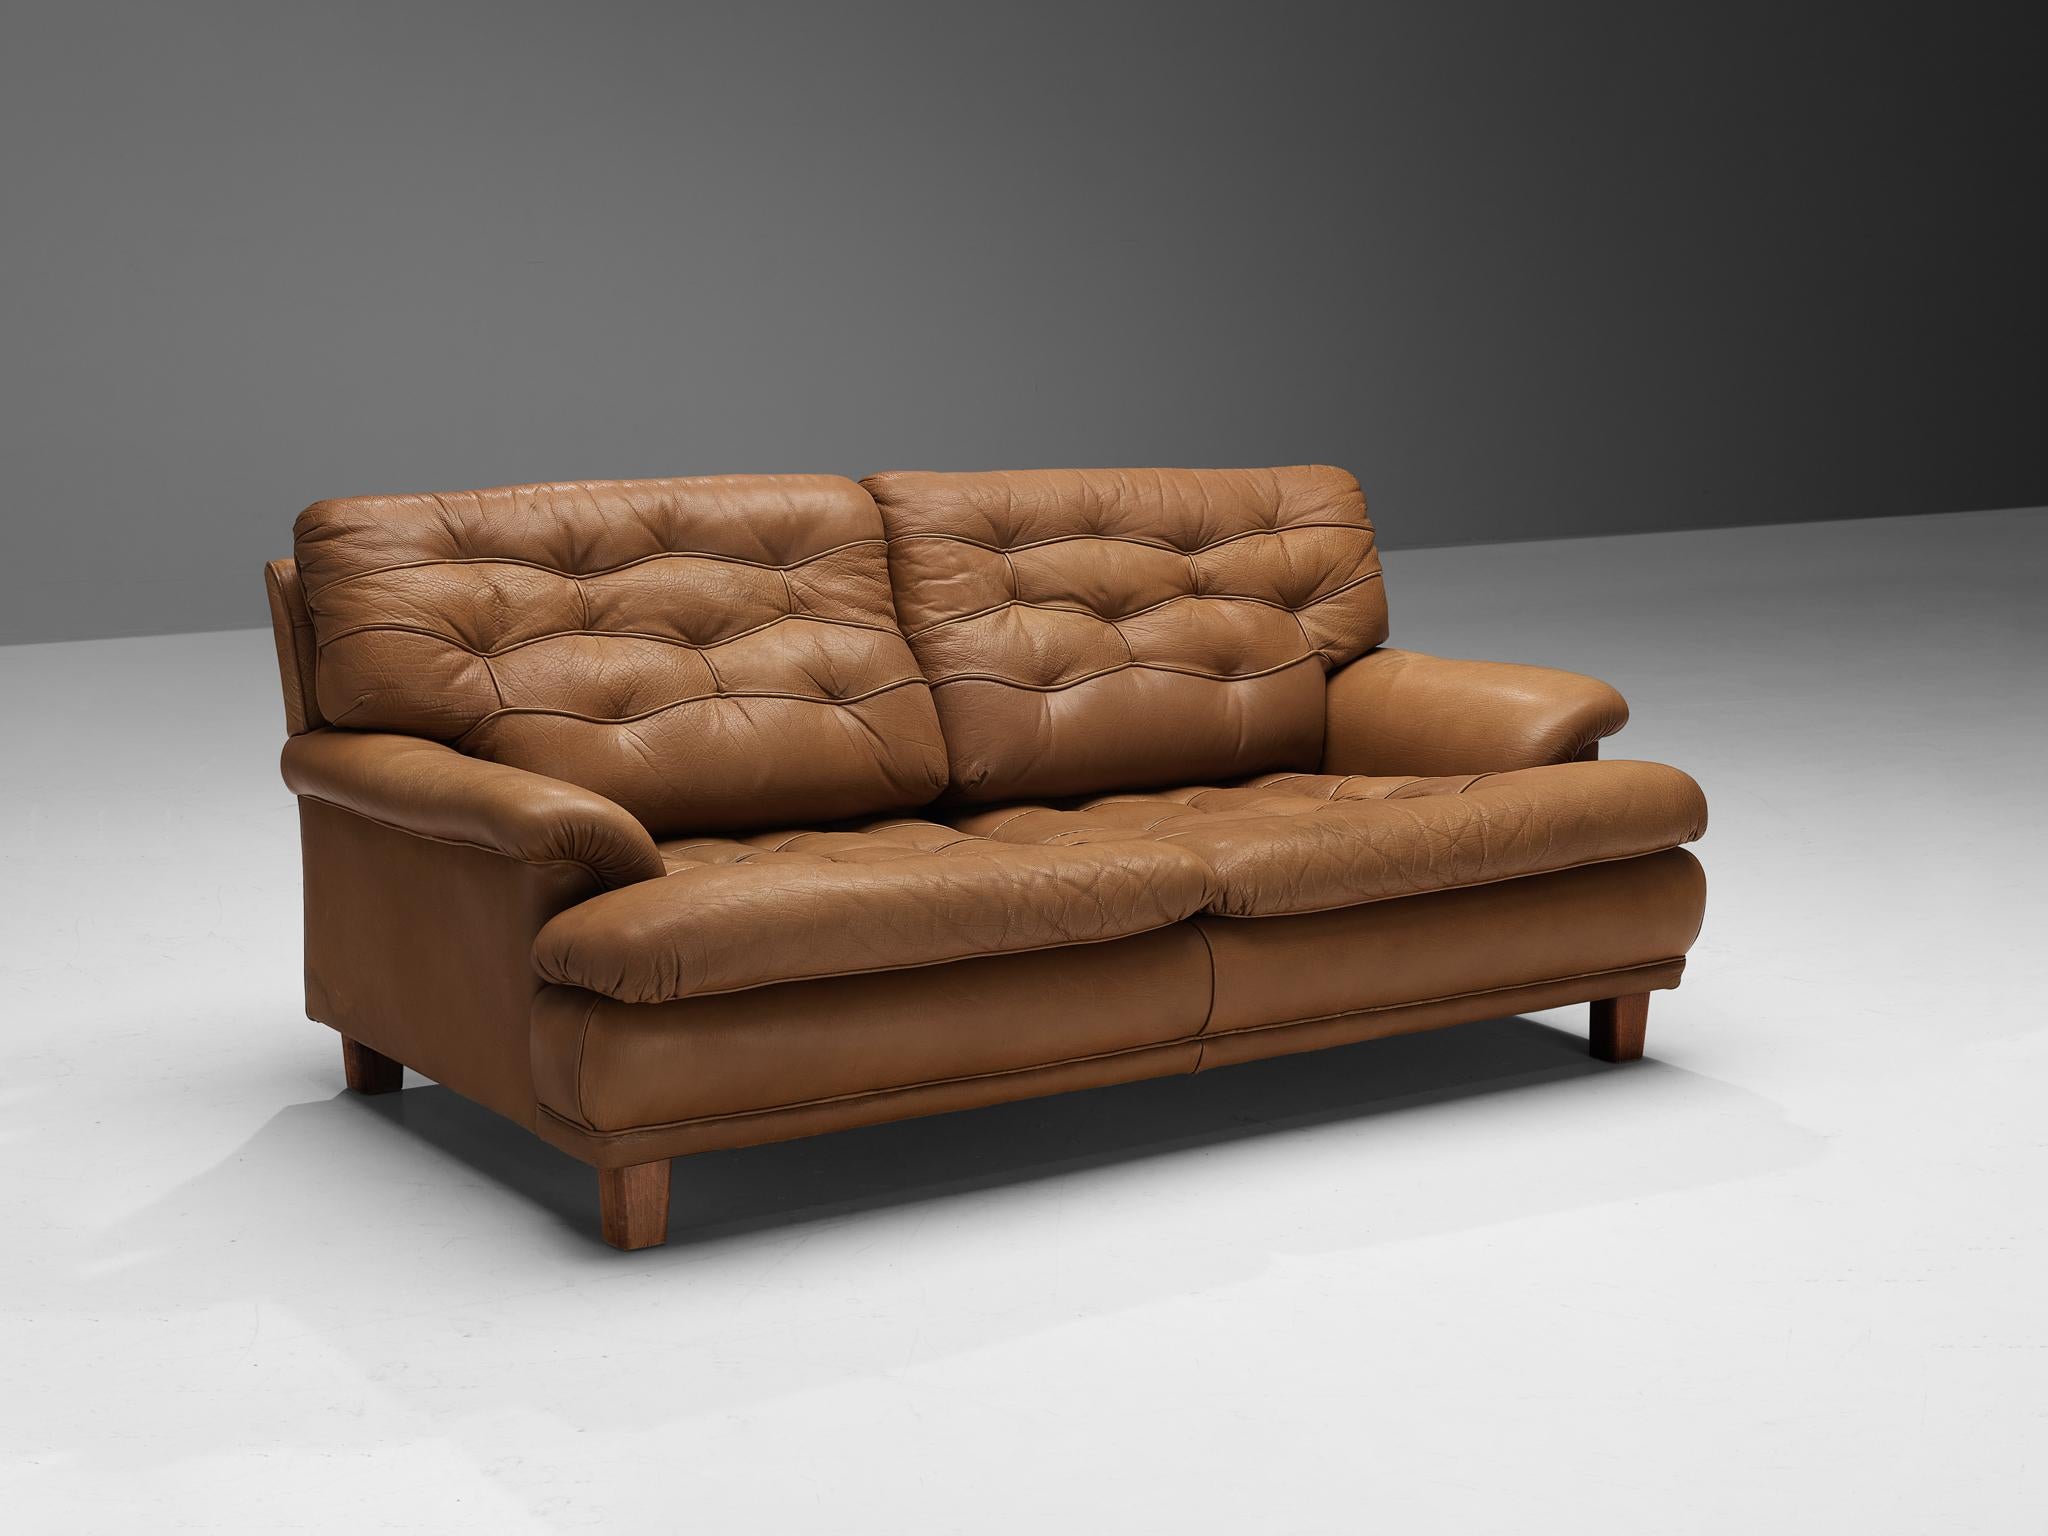 Arne Norell, sofa, brown leather, wood, Sweden, circa 1960s

This sofa is refined, modern with a robust touch. A well-designed sofa by talented Swedish designer Arne Norell (1917-1971). Characteristic for this design are the backrest cushions